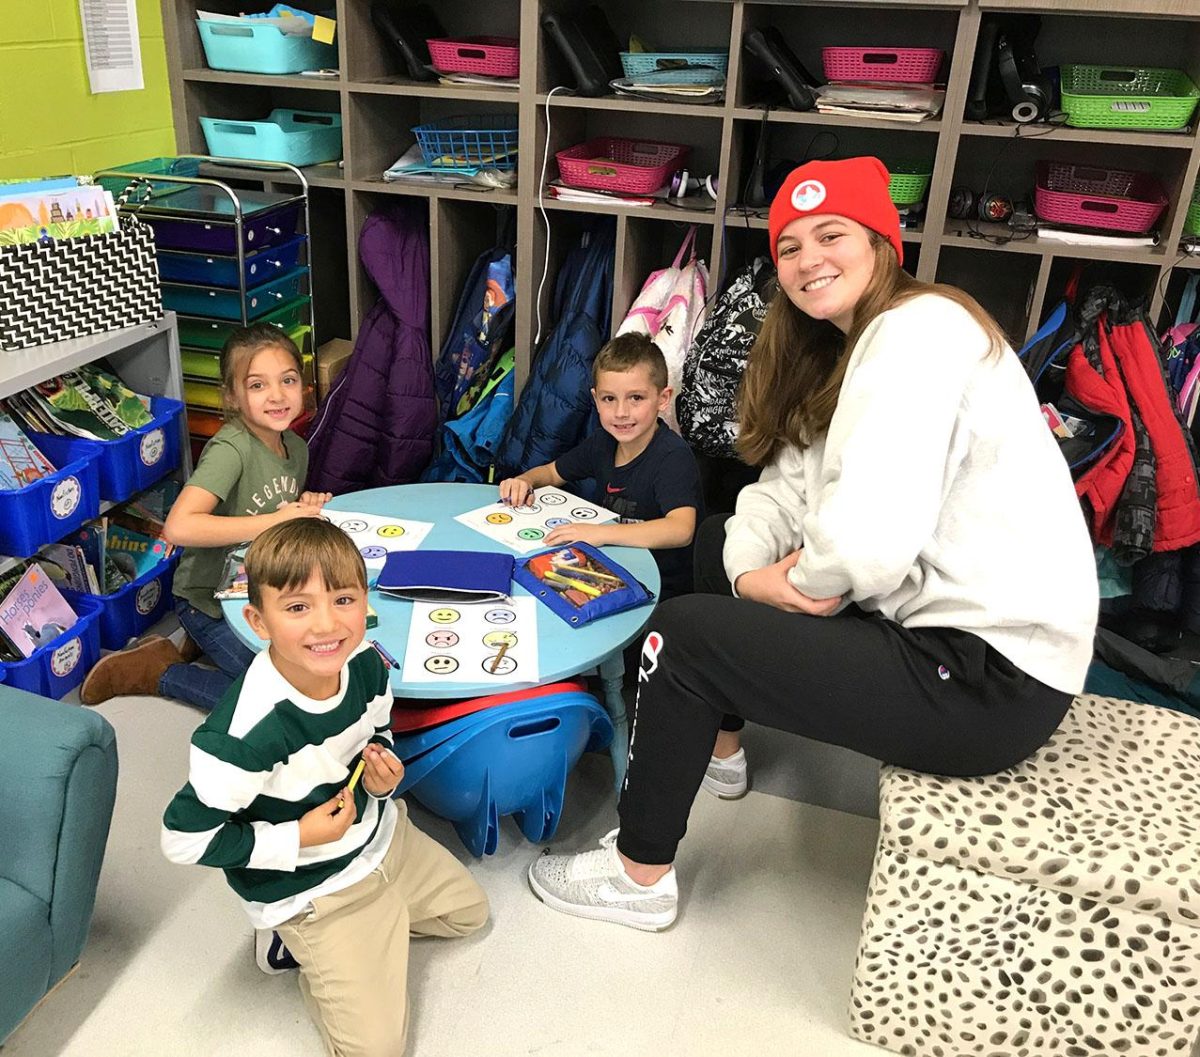 First+graders+at+Kramer+Elementary+%28left+to+right%29+Jazzy+Virk+Tiago+Motta+and+John+Cerillo%2C+learn+Spanish+phrases+from+Chloe+Newsom%2C+a+student+in+a+Miami+conversational+Spanish+class.+Photo+by+Aaron+Smith